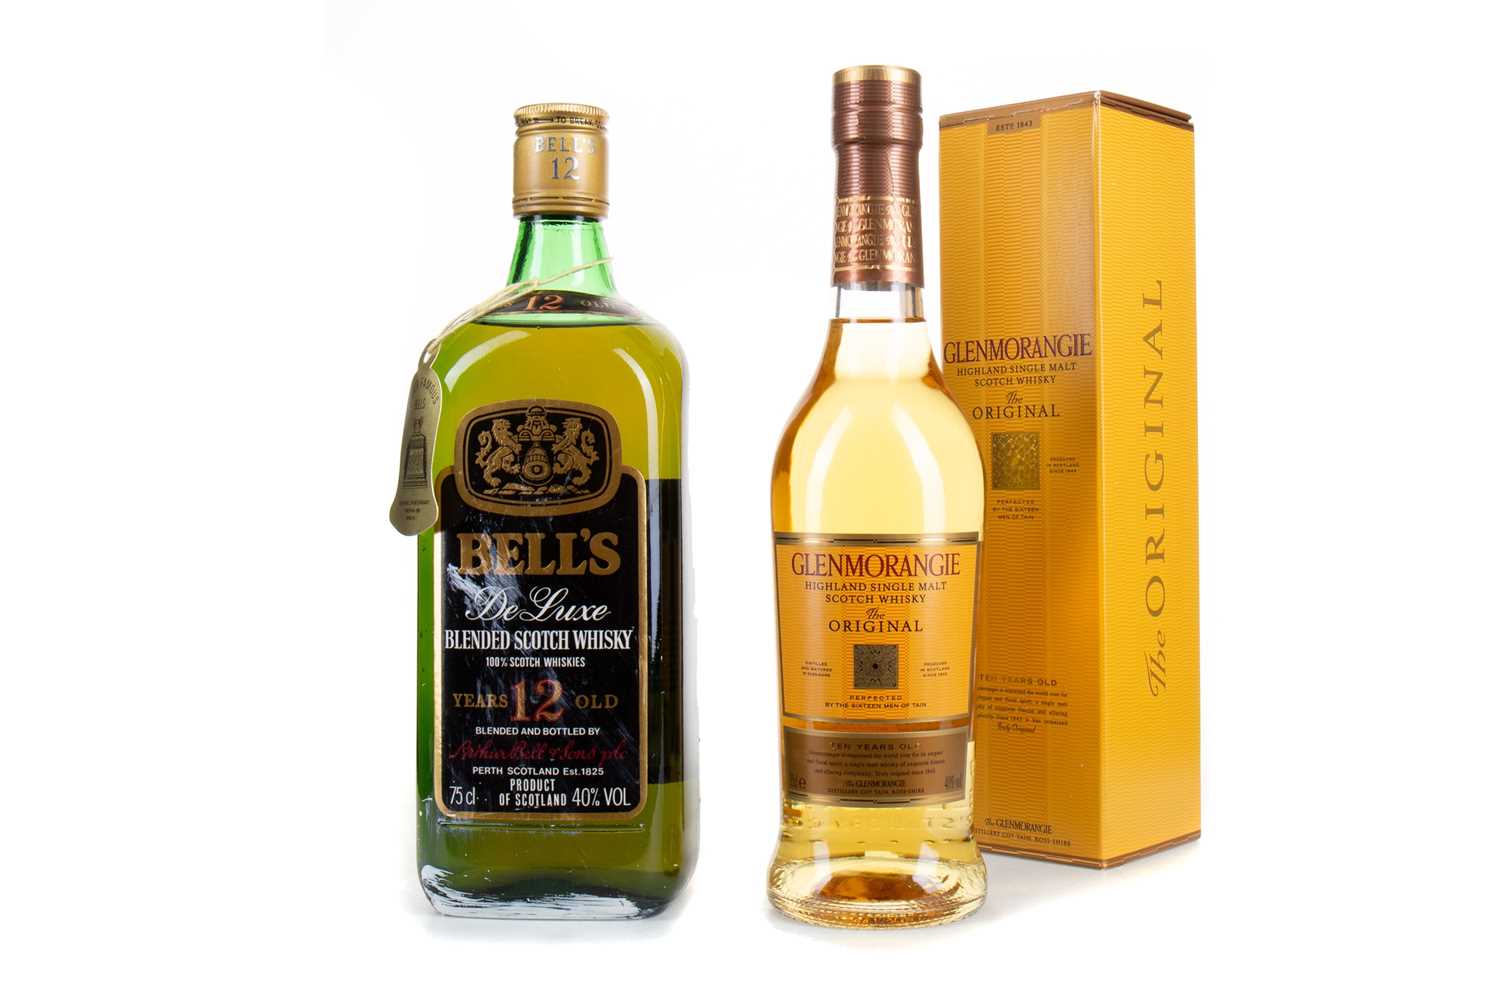 Lot 27 - BELL'S 12 YEAR OLD 75CL AND GLENMORANGIE 10 YEAR OLD 35CL